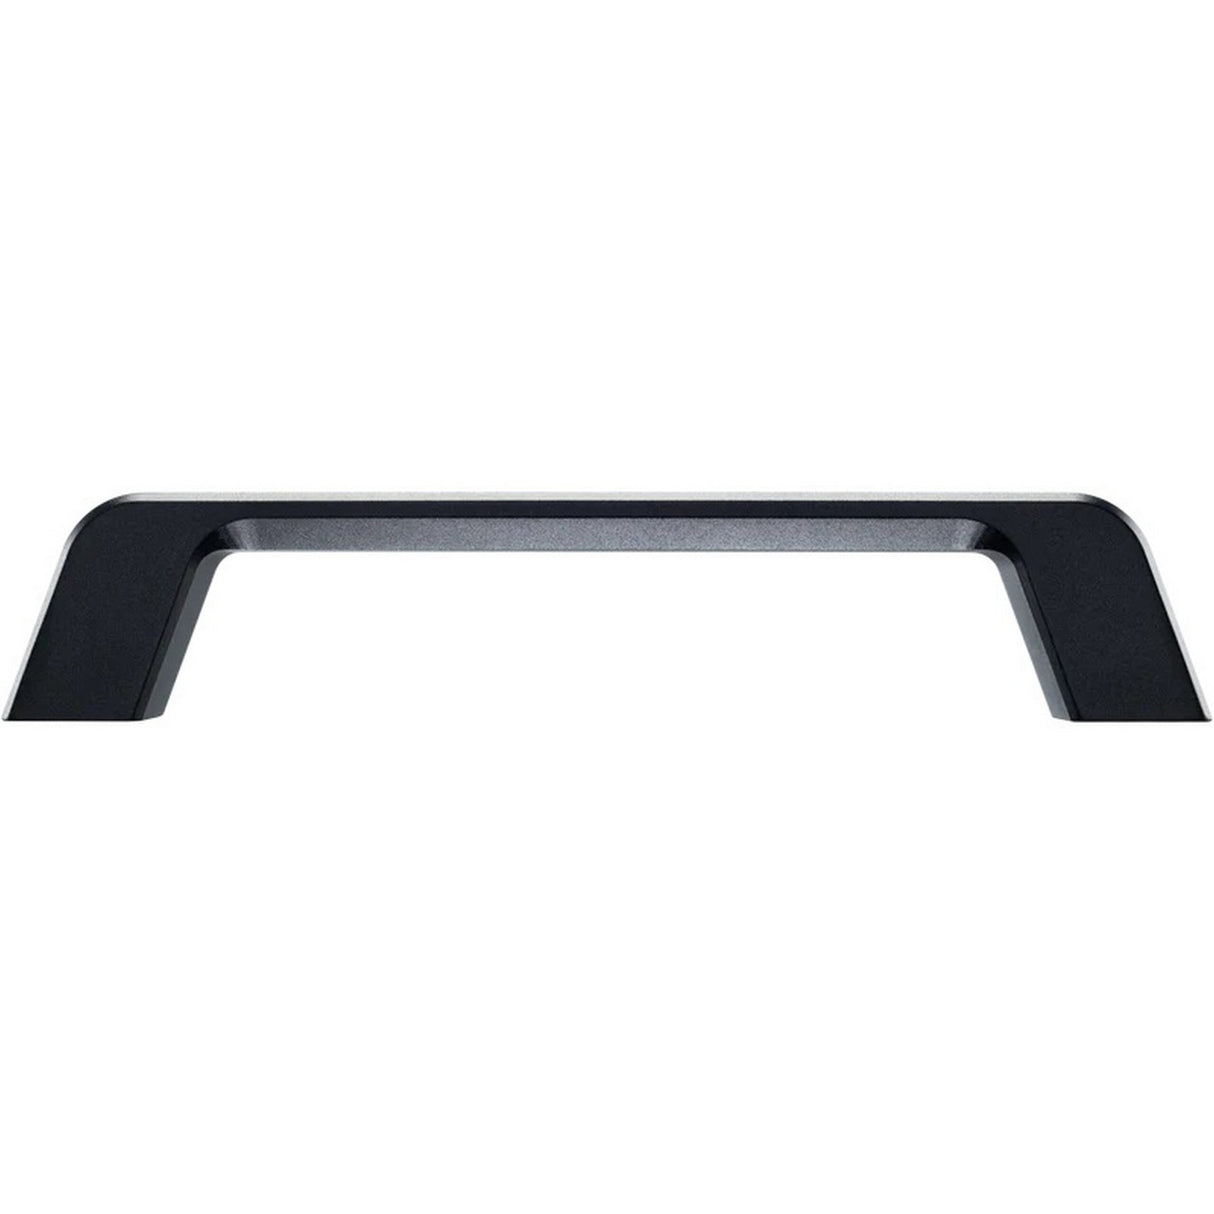 SmallHD ACC-HANDLE-4K Replacement Handle for 4K Monitor